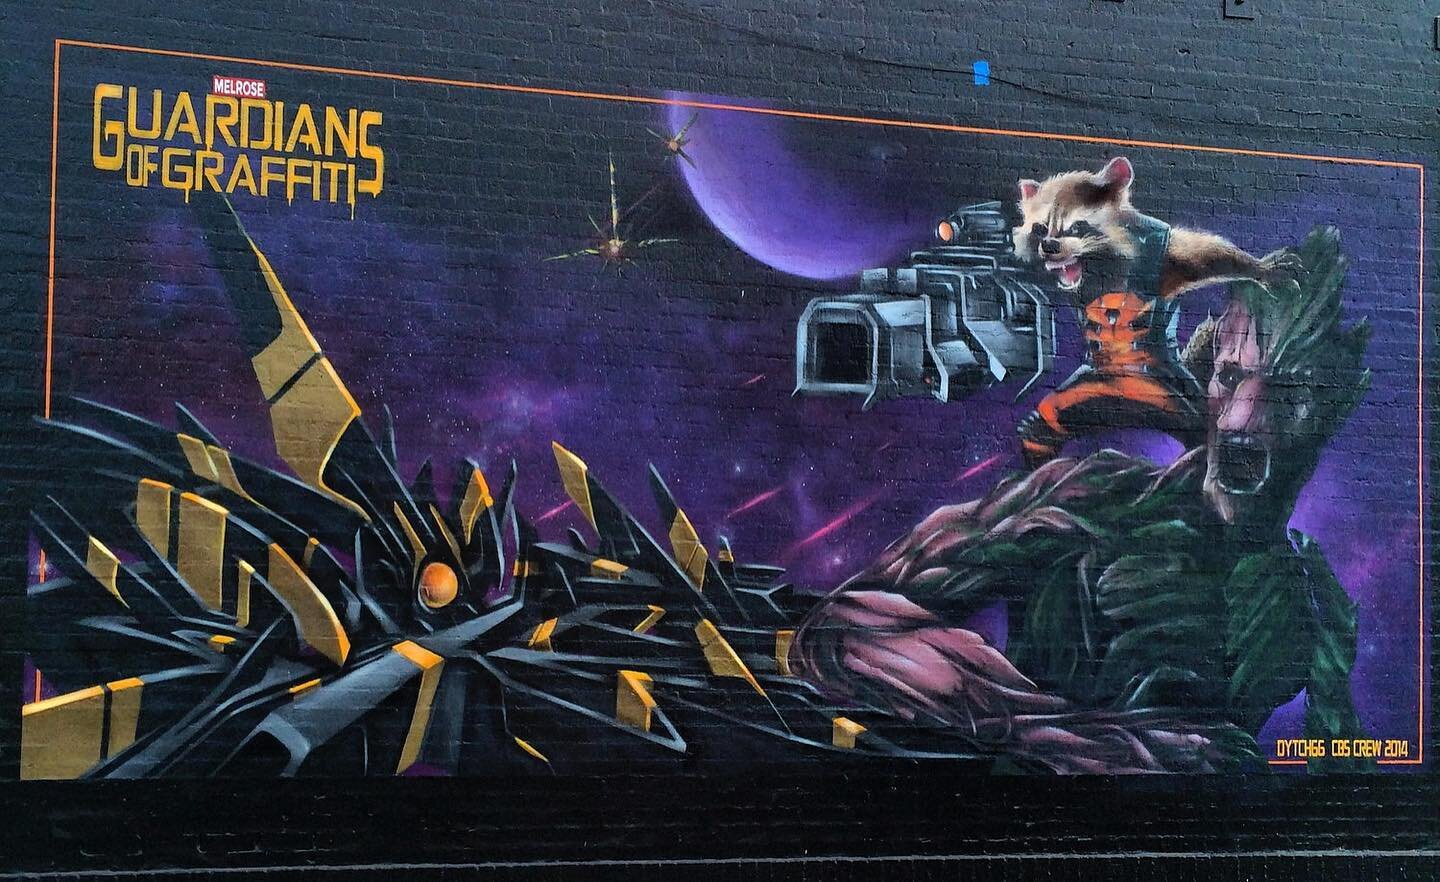 Throw back Thursday, have you seen the new @guardiansofthegalaxy movie?!?! Here&rdquo;s @dytch66 fan mural from 2014 with his 3D letters to enjoy!! #graffiti #3dletters #dytch66 #spraypaint #blankcanvasla #2014 #2023